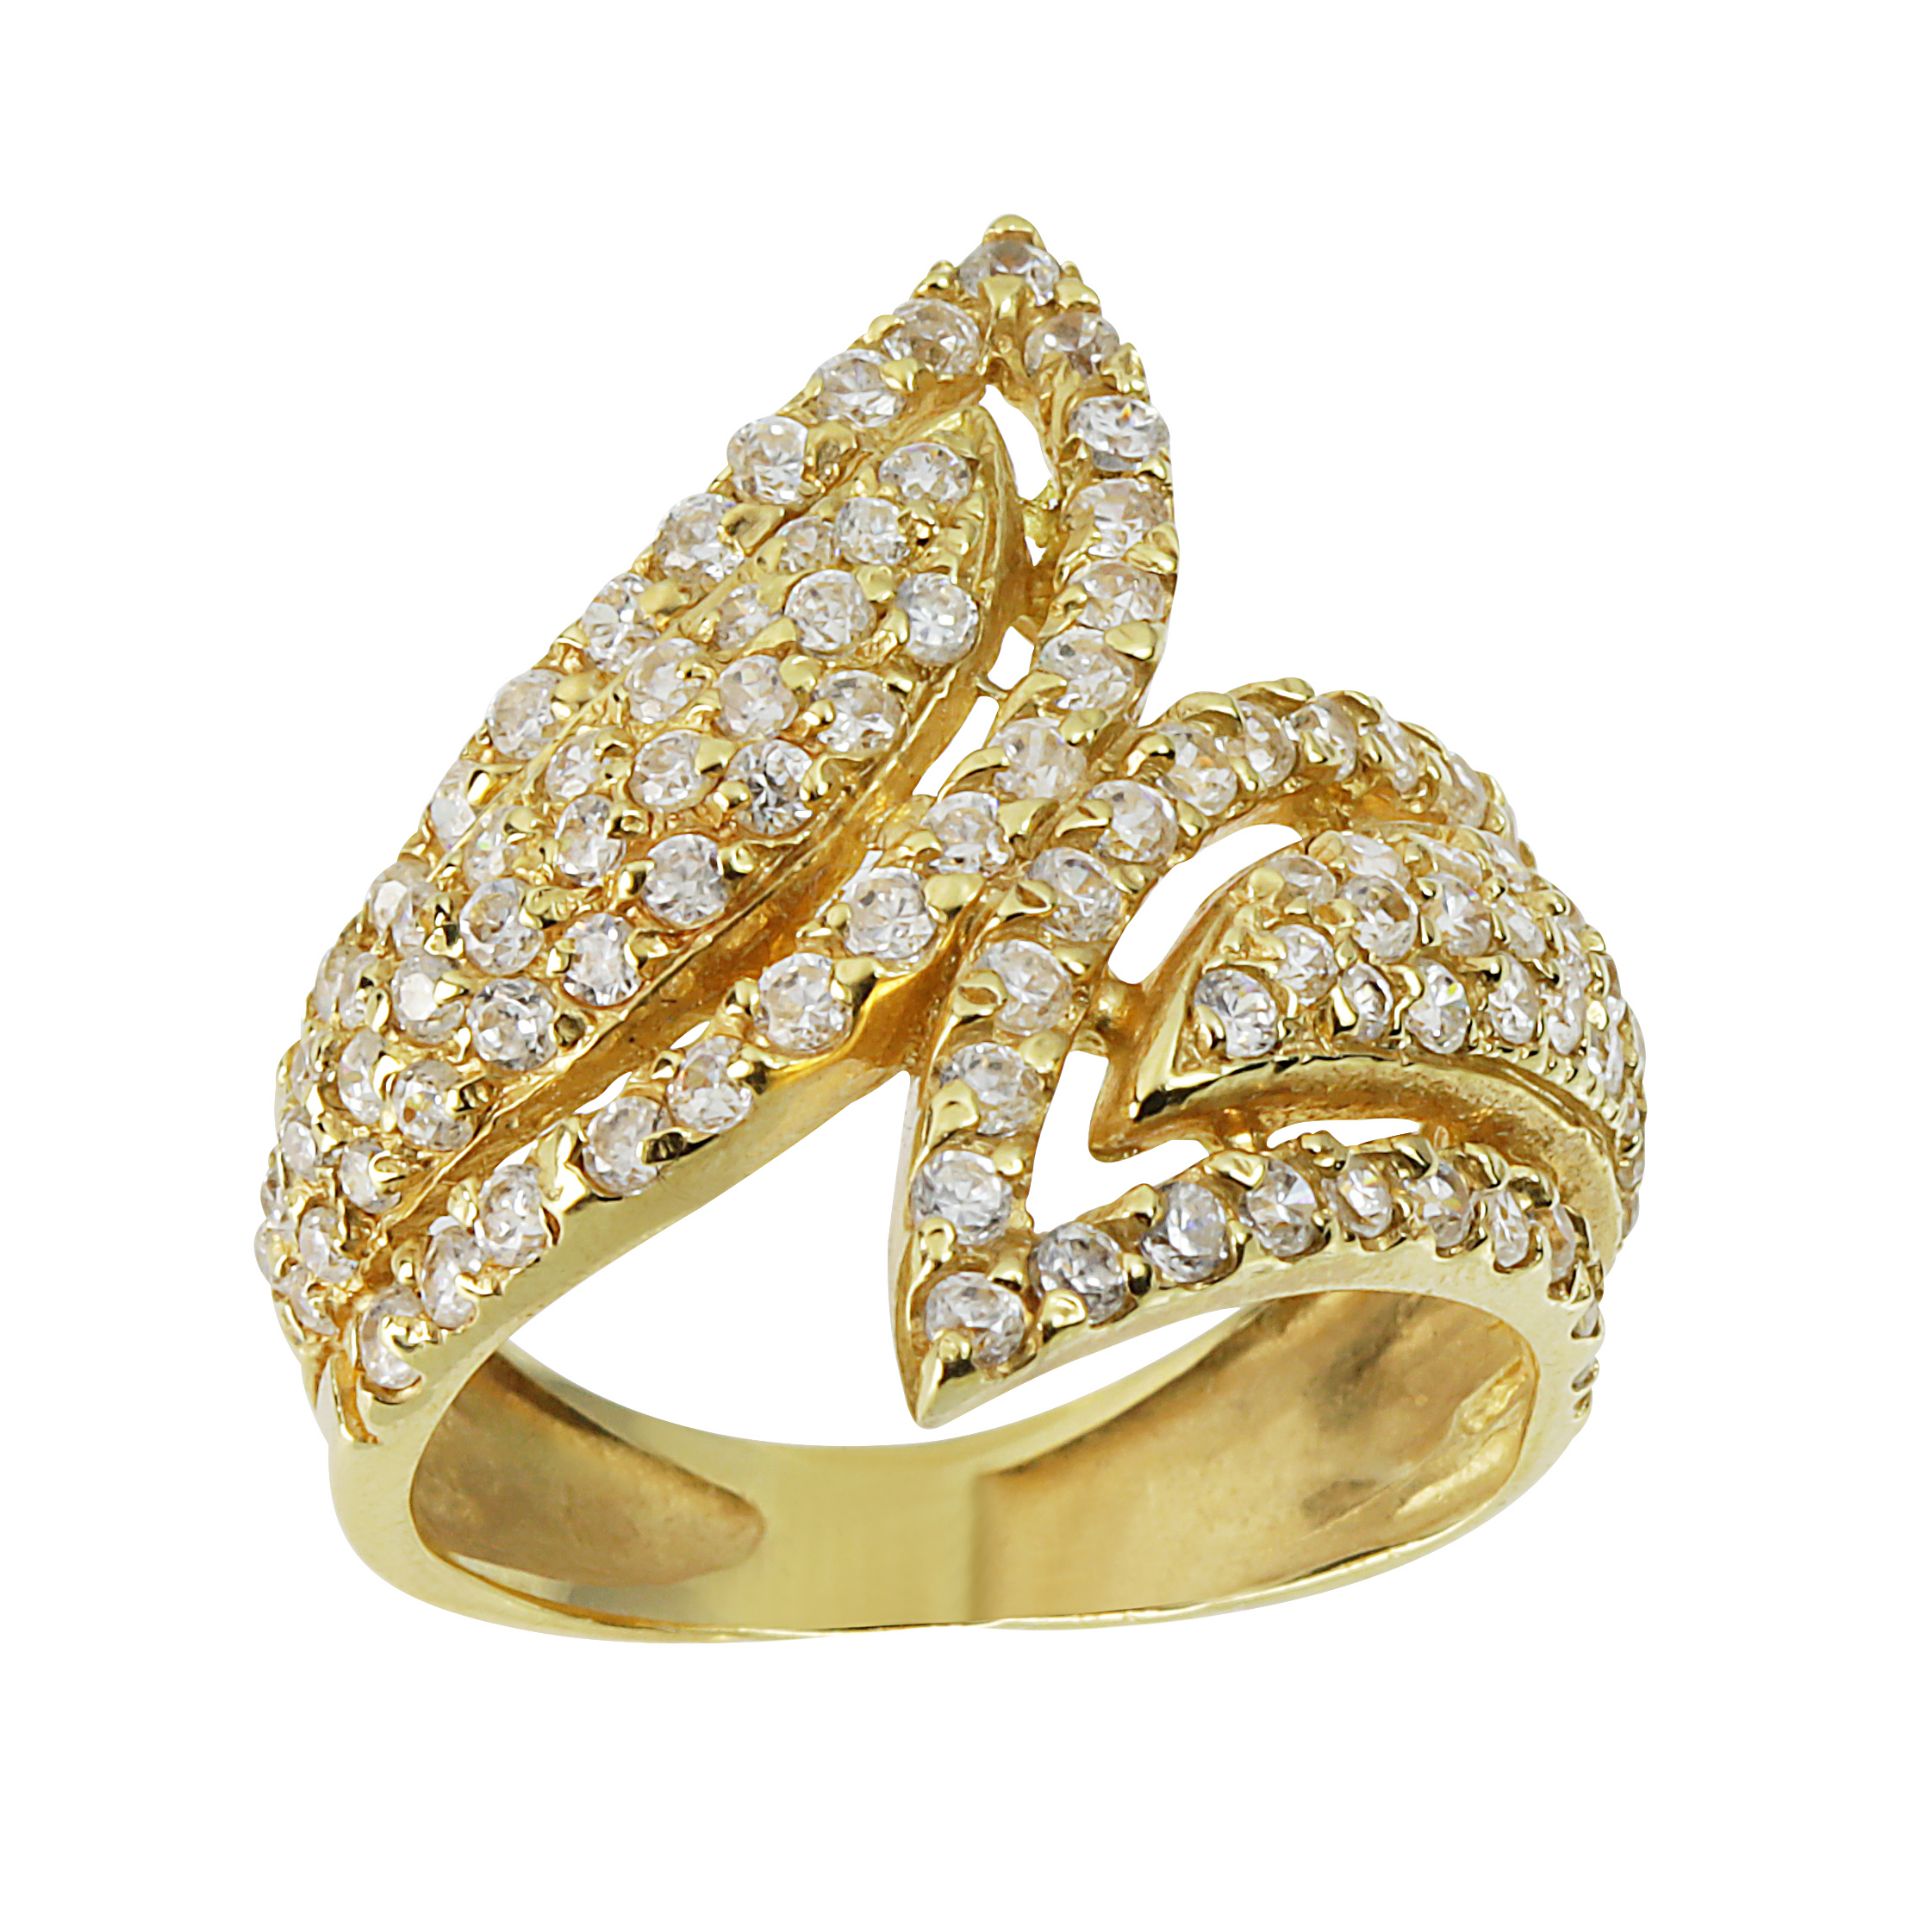 A DIAMOND DRESS RING in high carat yellow gold, in the manner of Boucheron, designed as a twisted